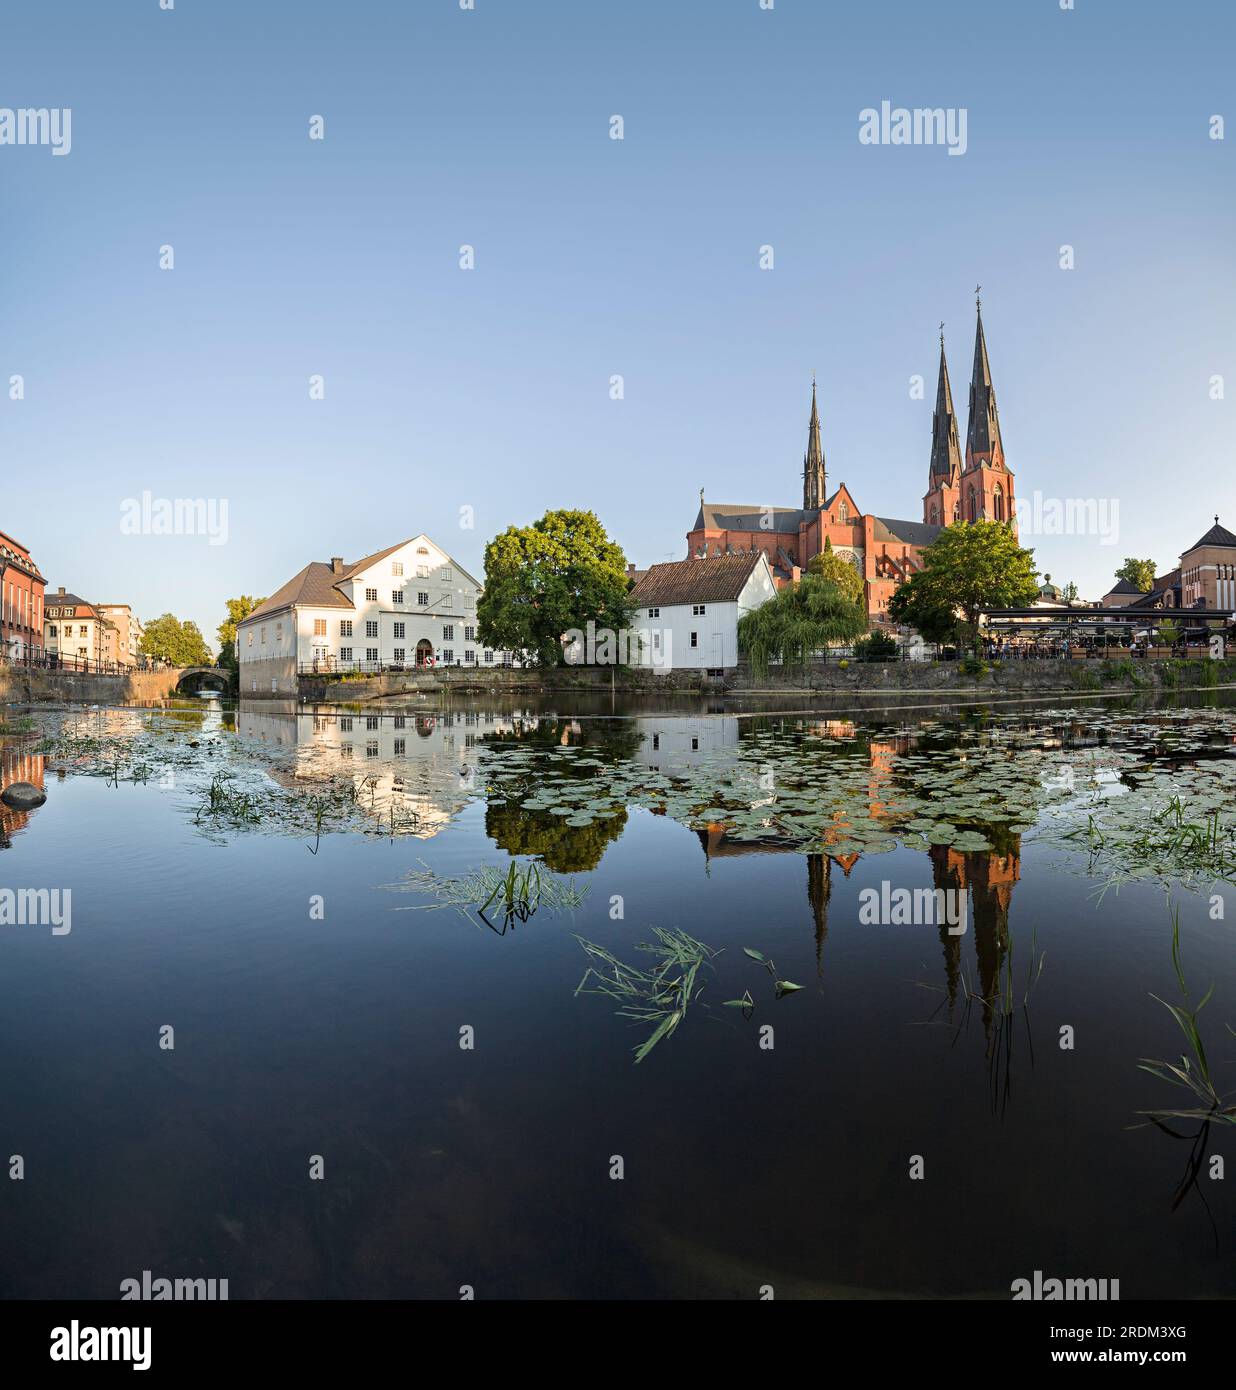 The cathedral and houses reflecting in the water of the Fyris river against sky. Uppsala, Sweden Stock Photo